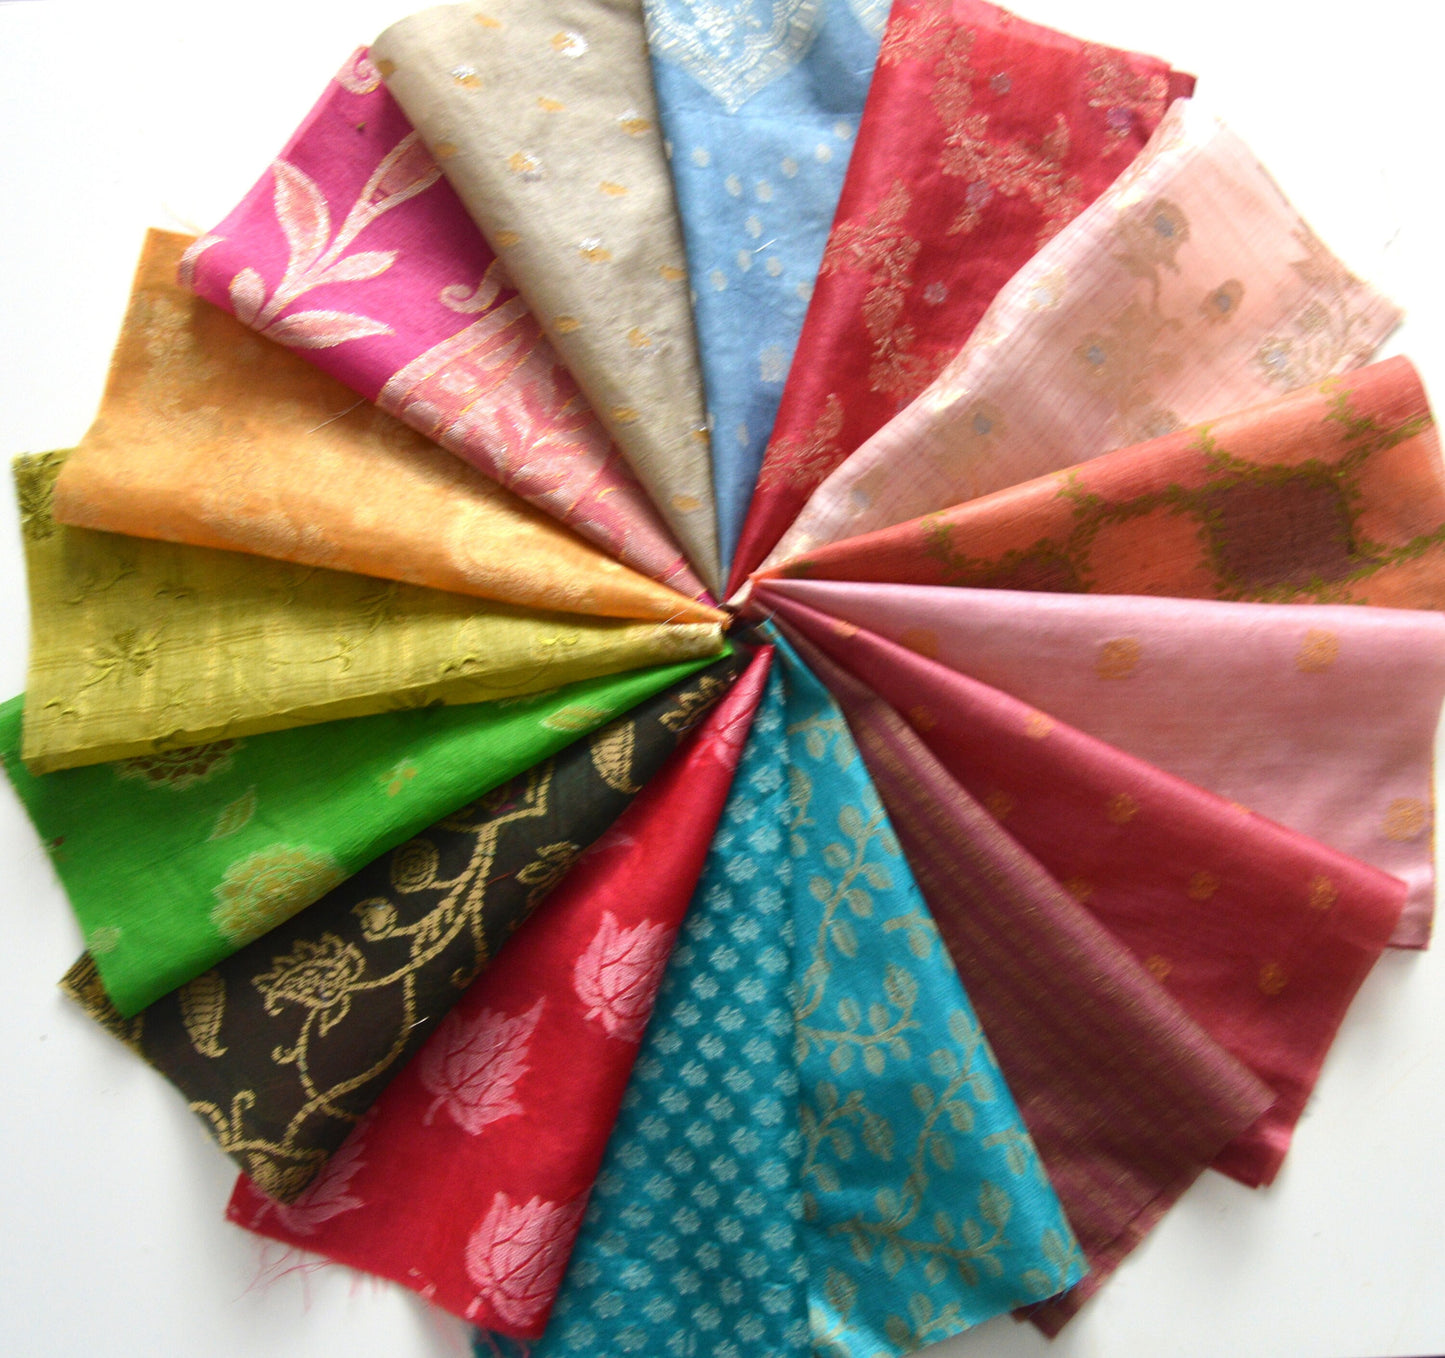 10 Inch x 16 Pieces Mixed Recycled Vintage Sari Squares Brocade Craft Fabric Card Making Collage Mixed Media Textile Art Sewing Junk Journal